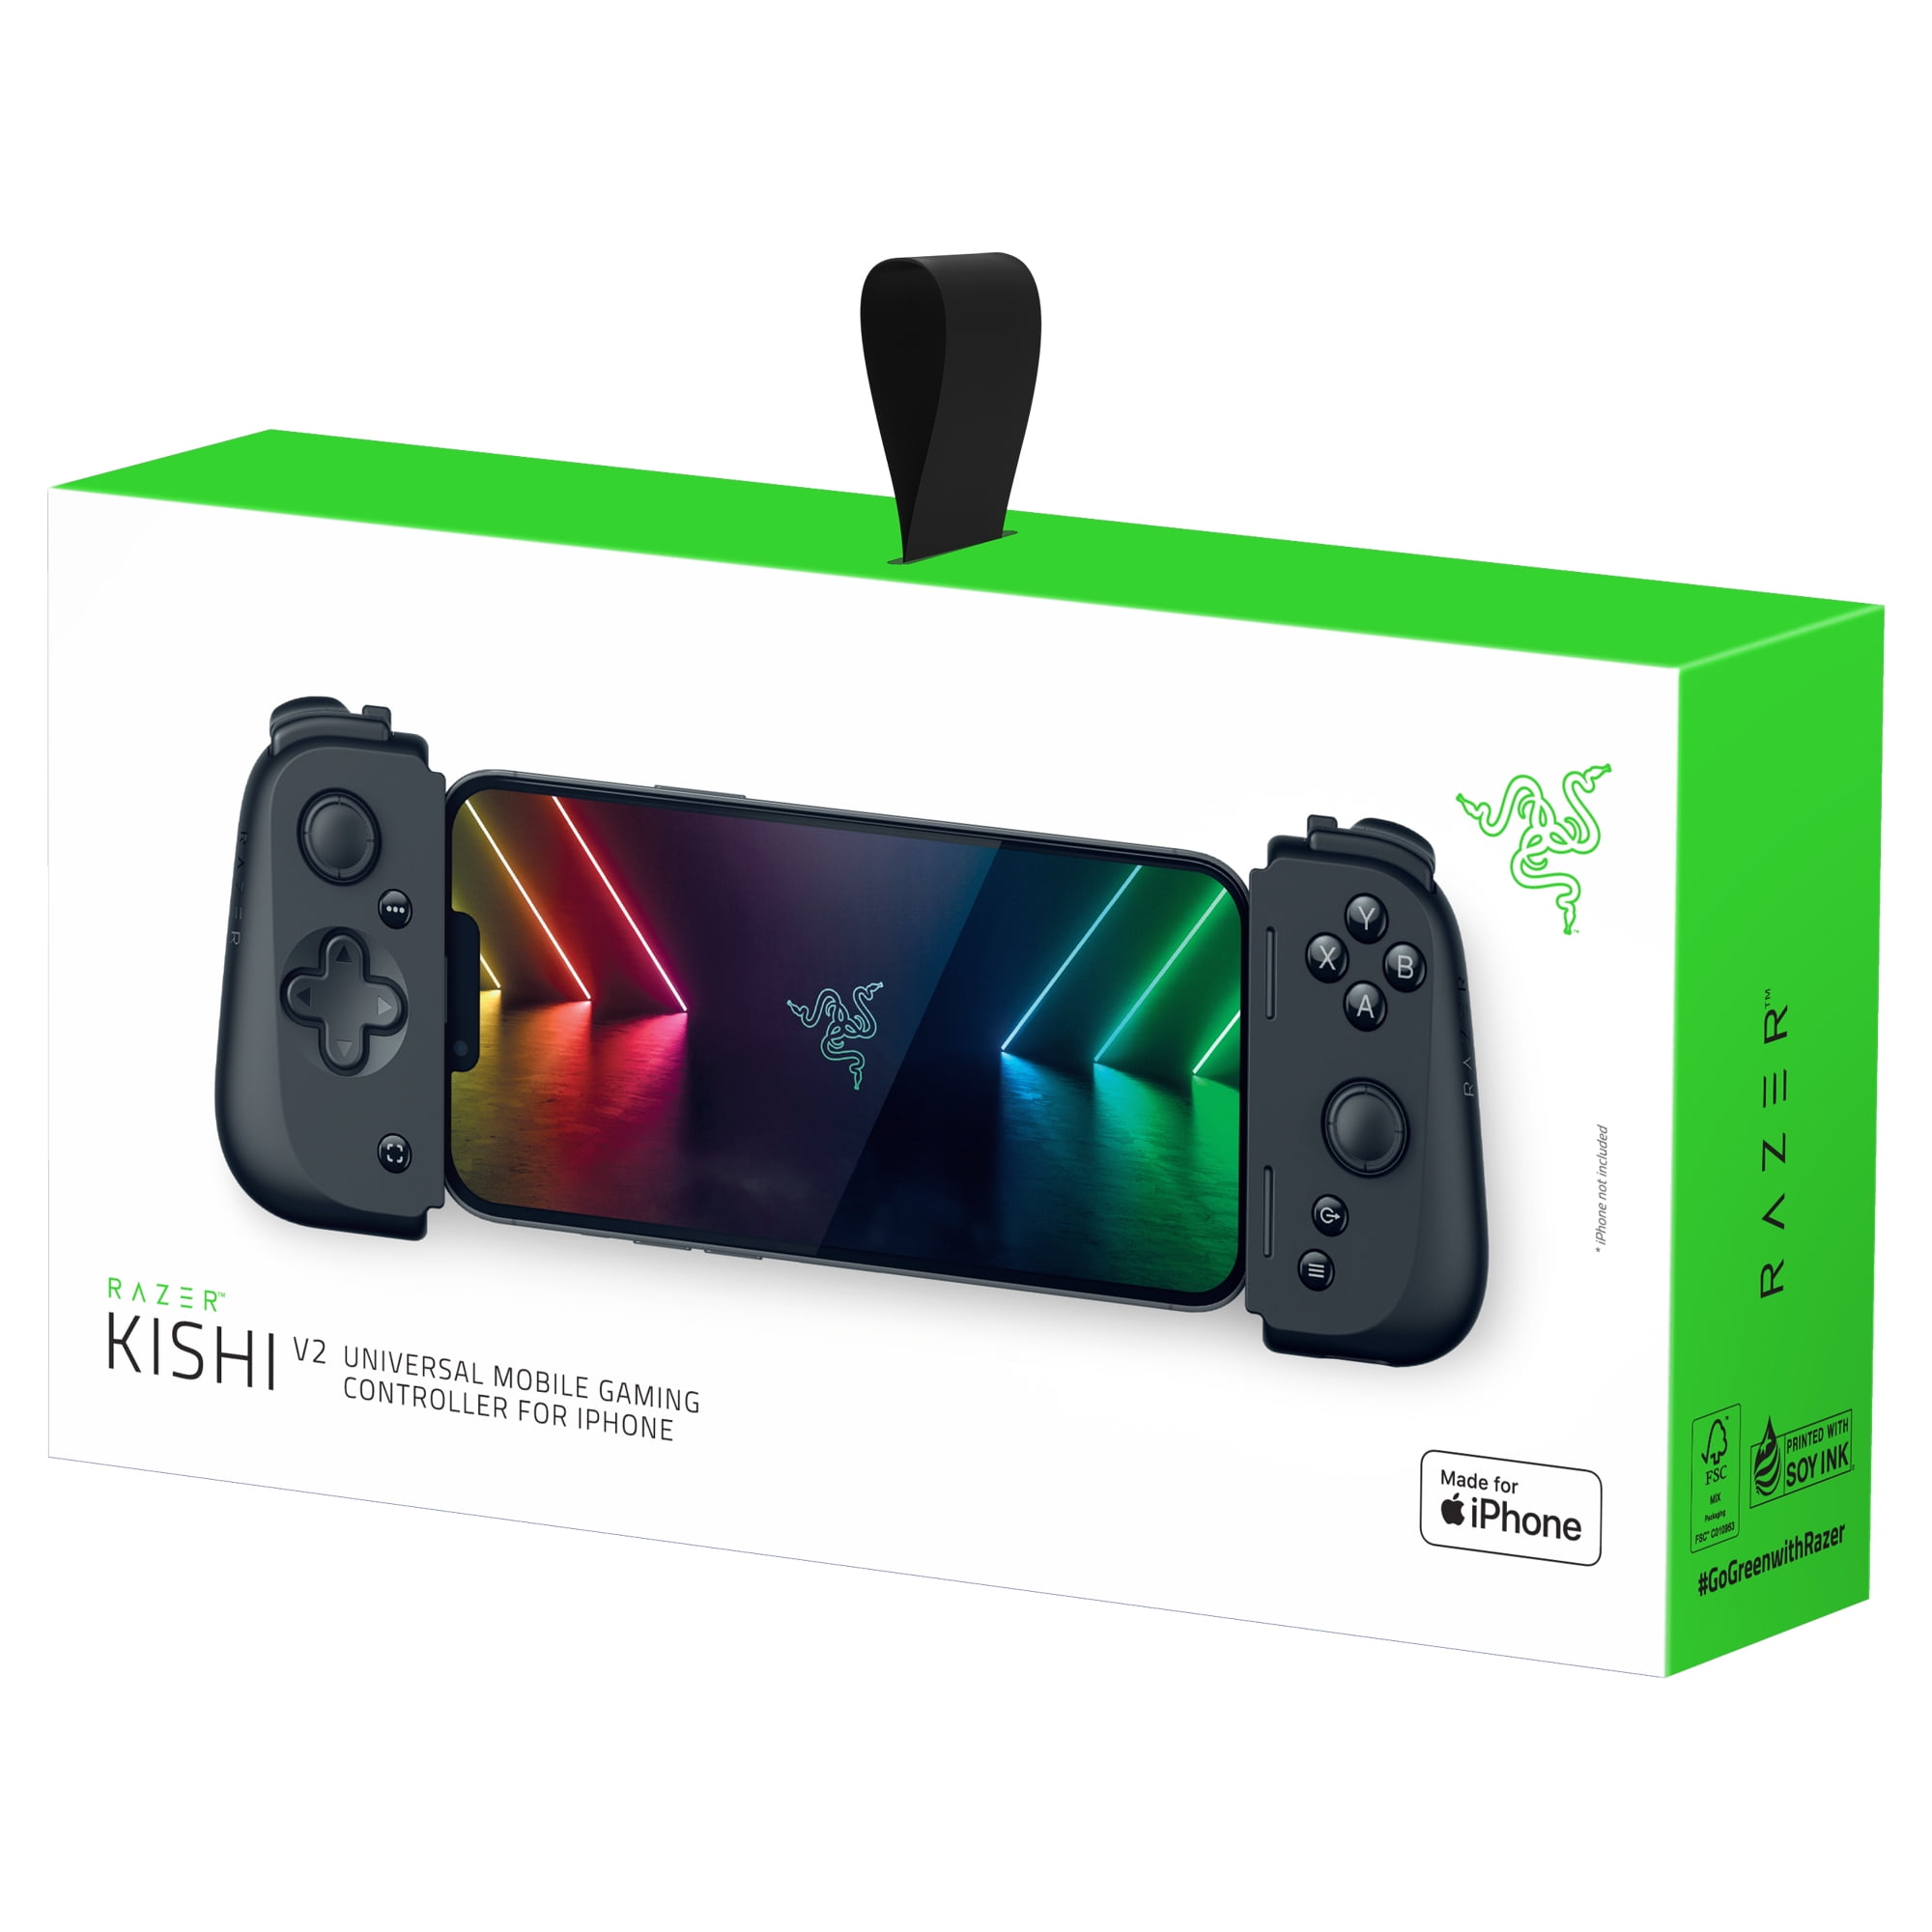 Razer Kishi V2 Mobile Gaming Controller for iPhone, Console